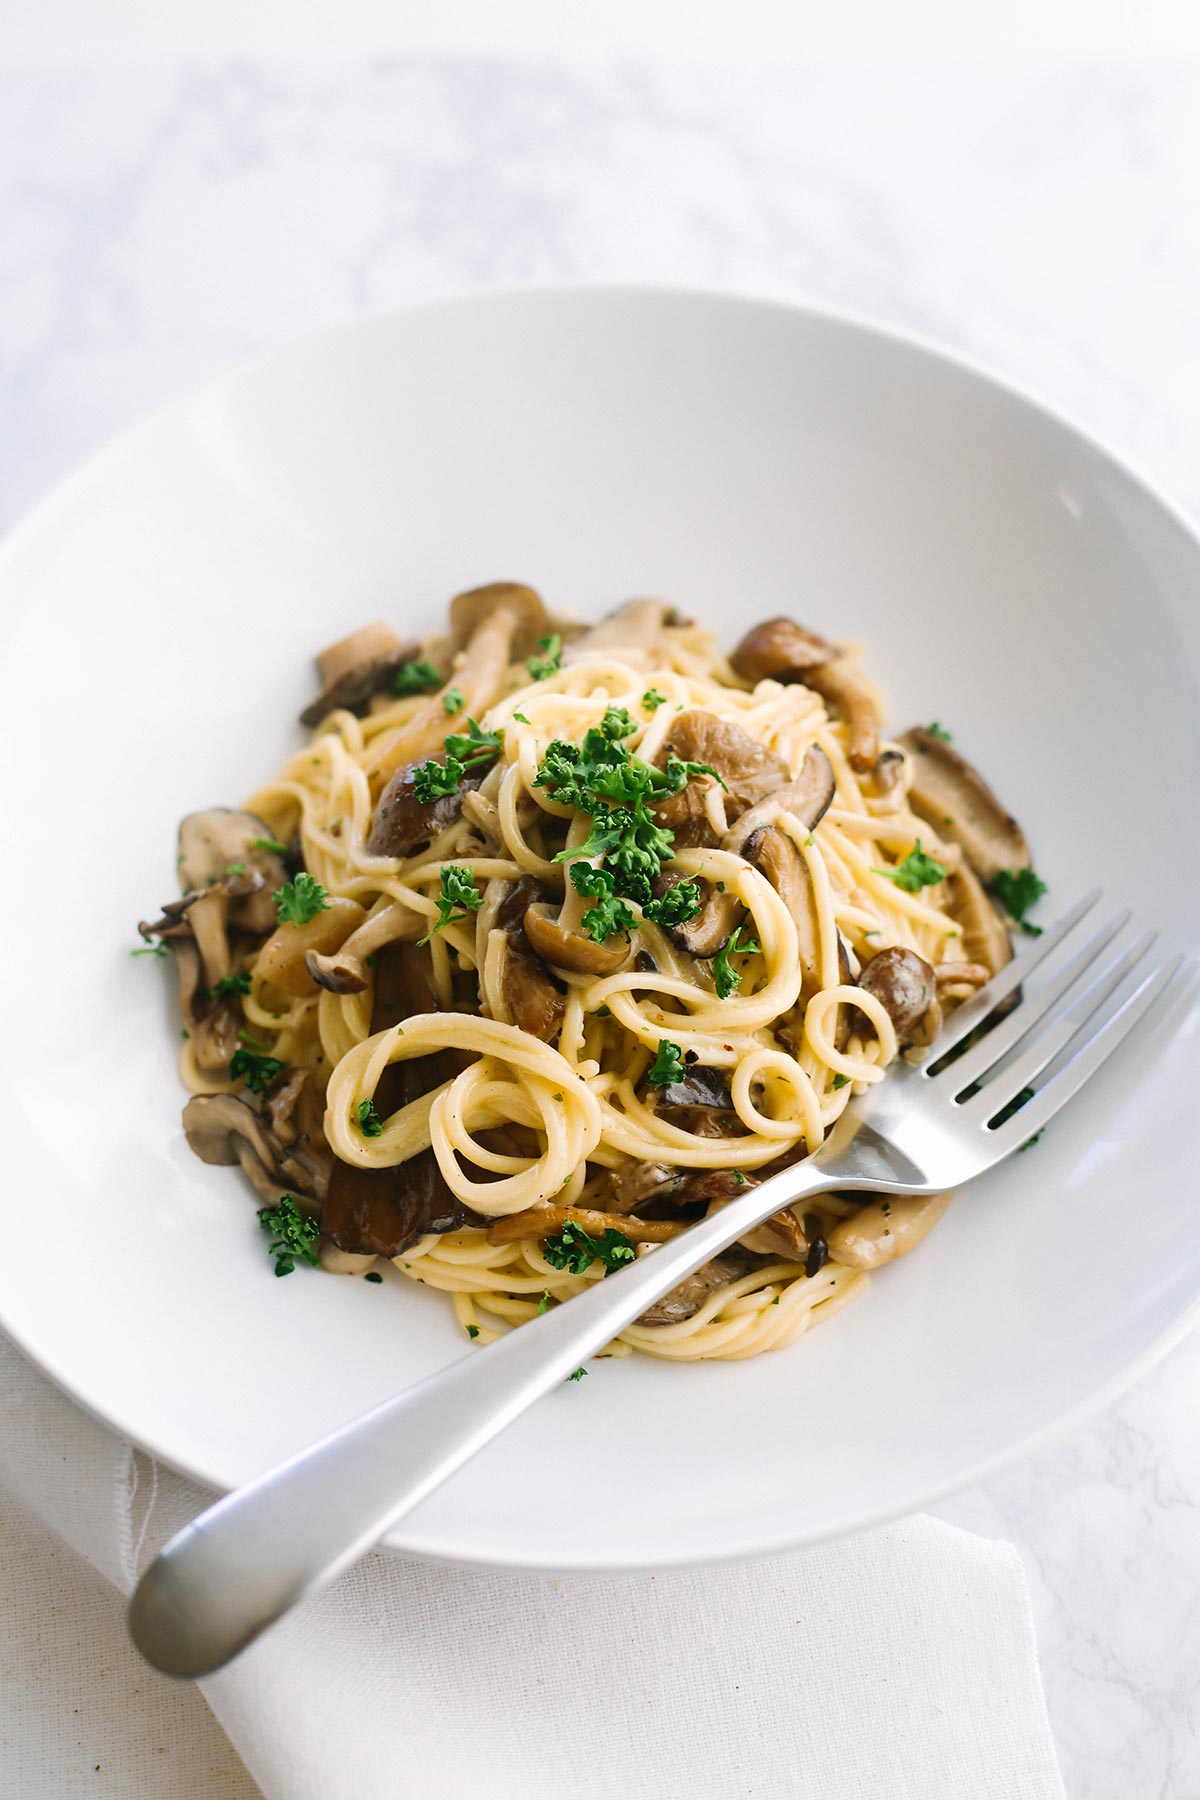 Mushroom pasta for keto and low carb. Easy recipe with shirataki noodles.